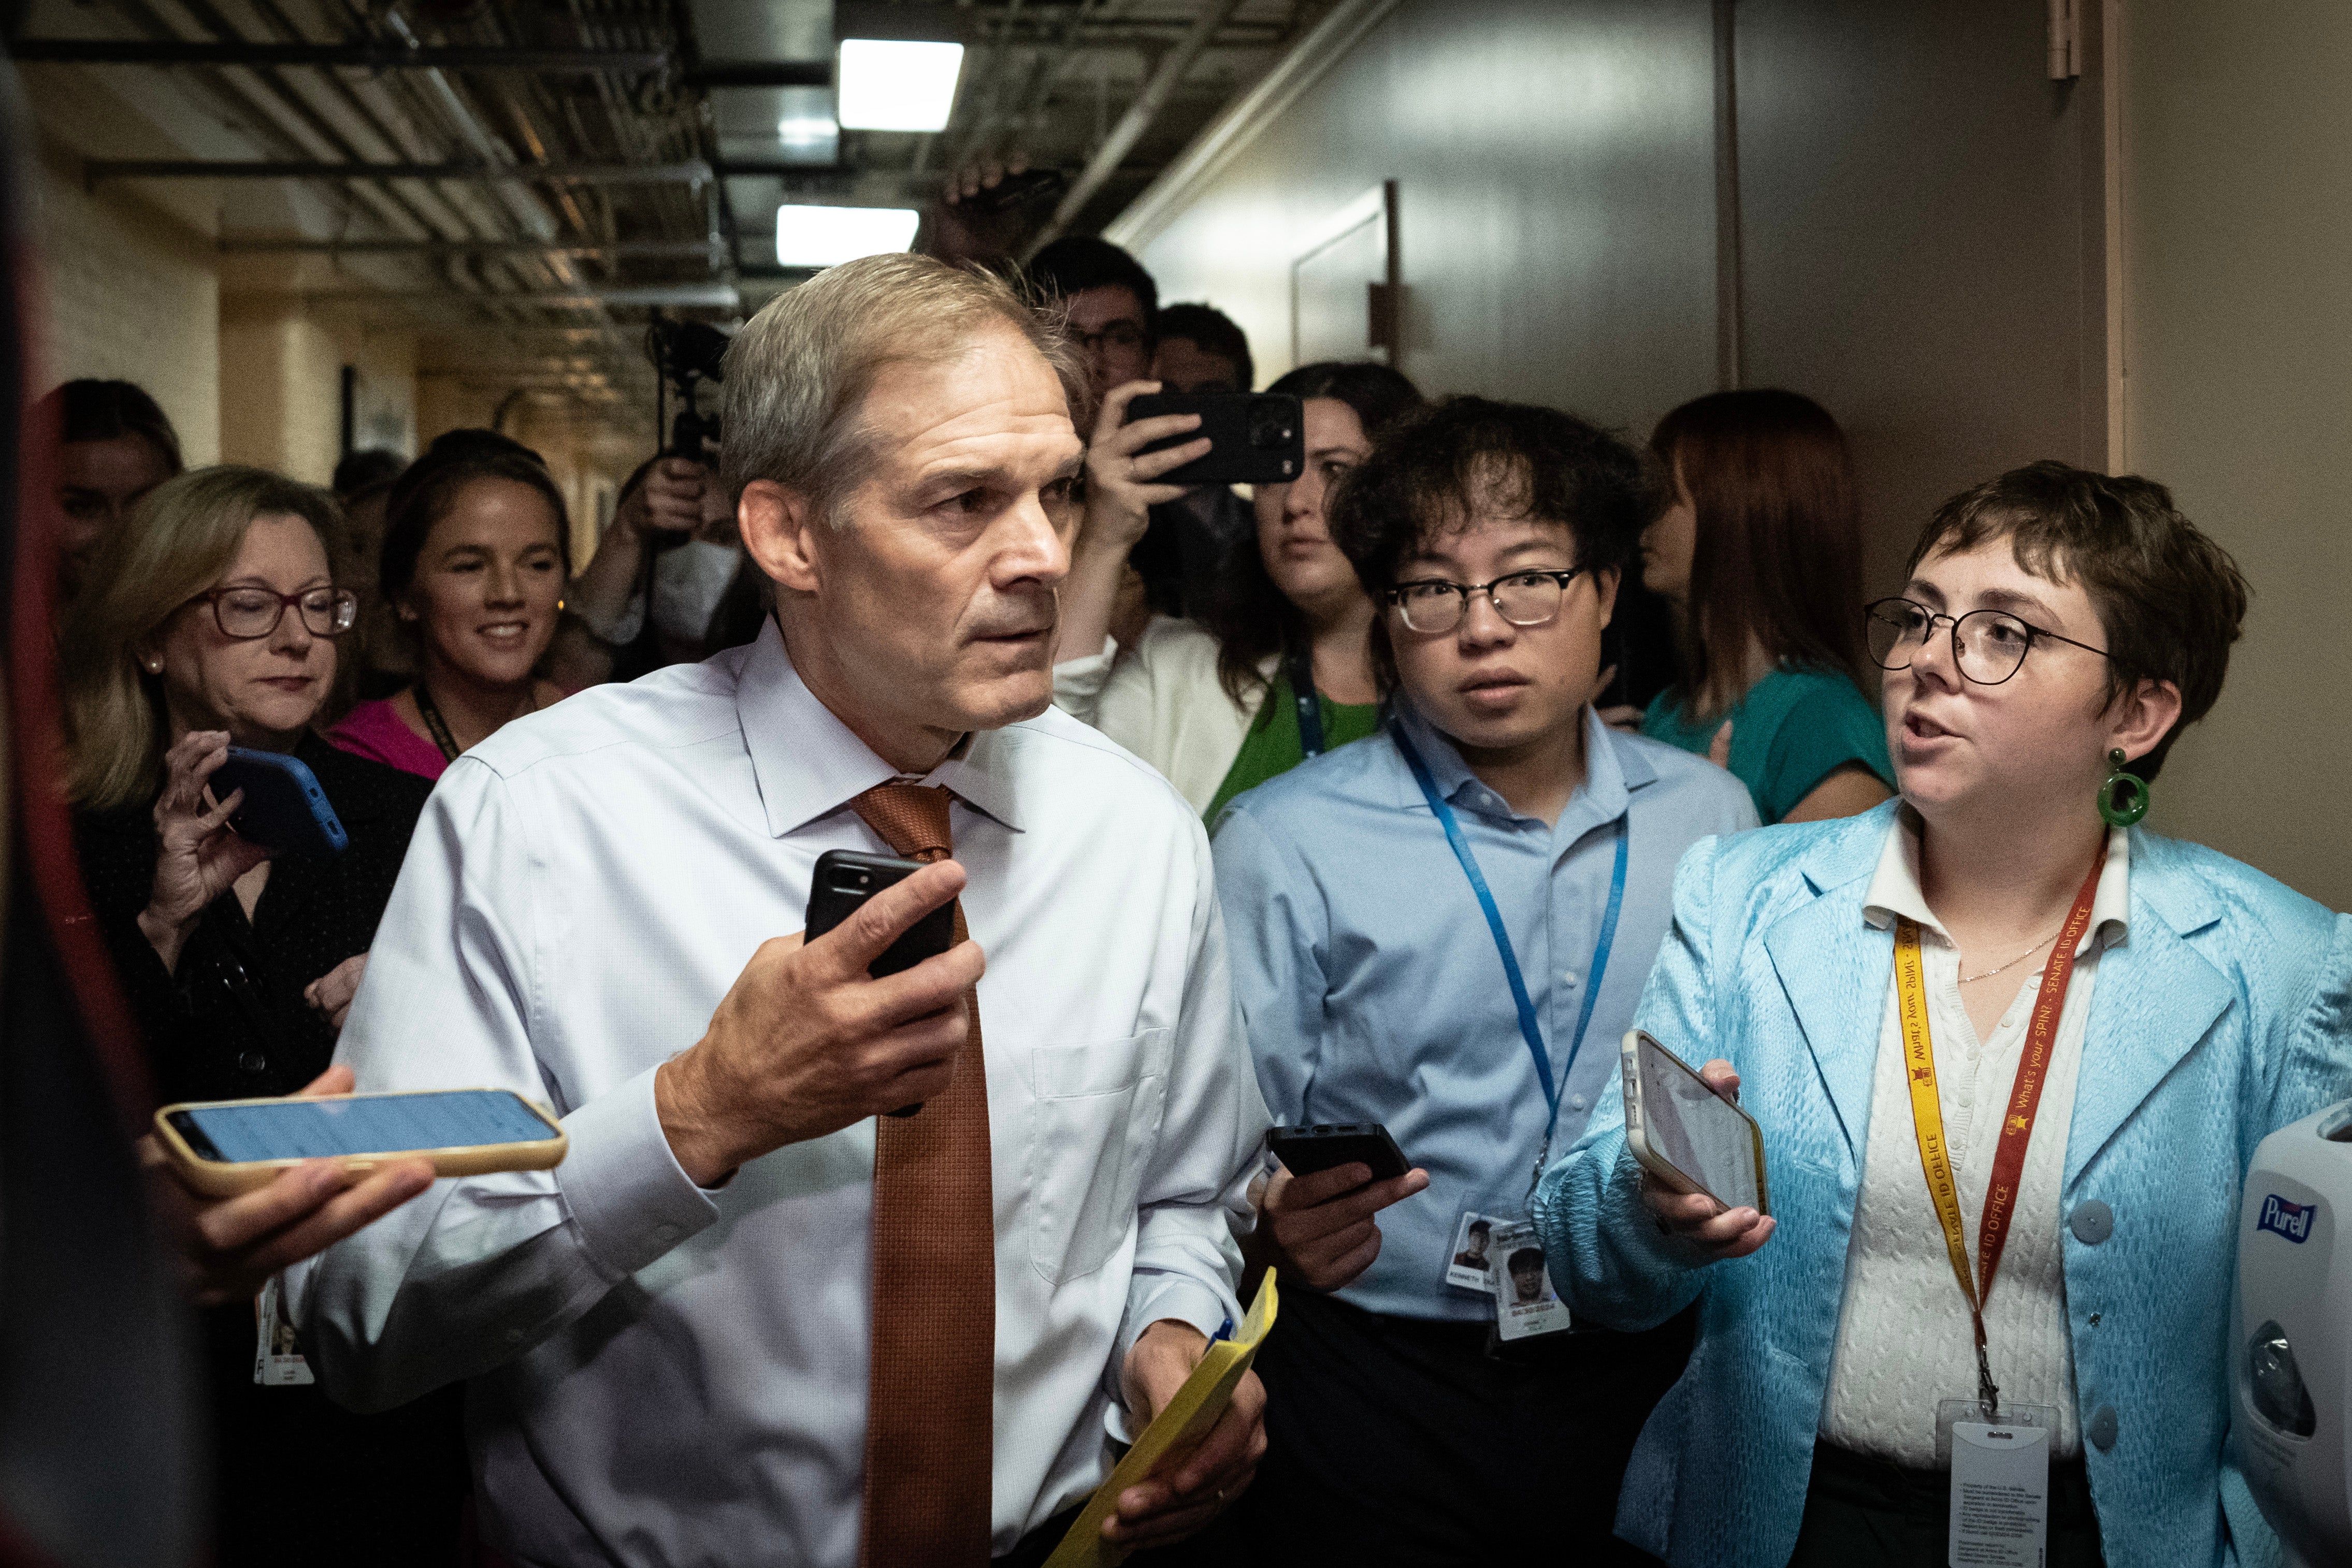 Jim Jordan is making another attempt to become speaker